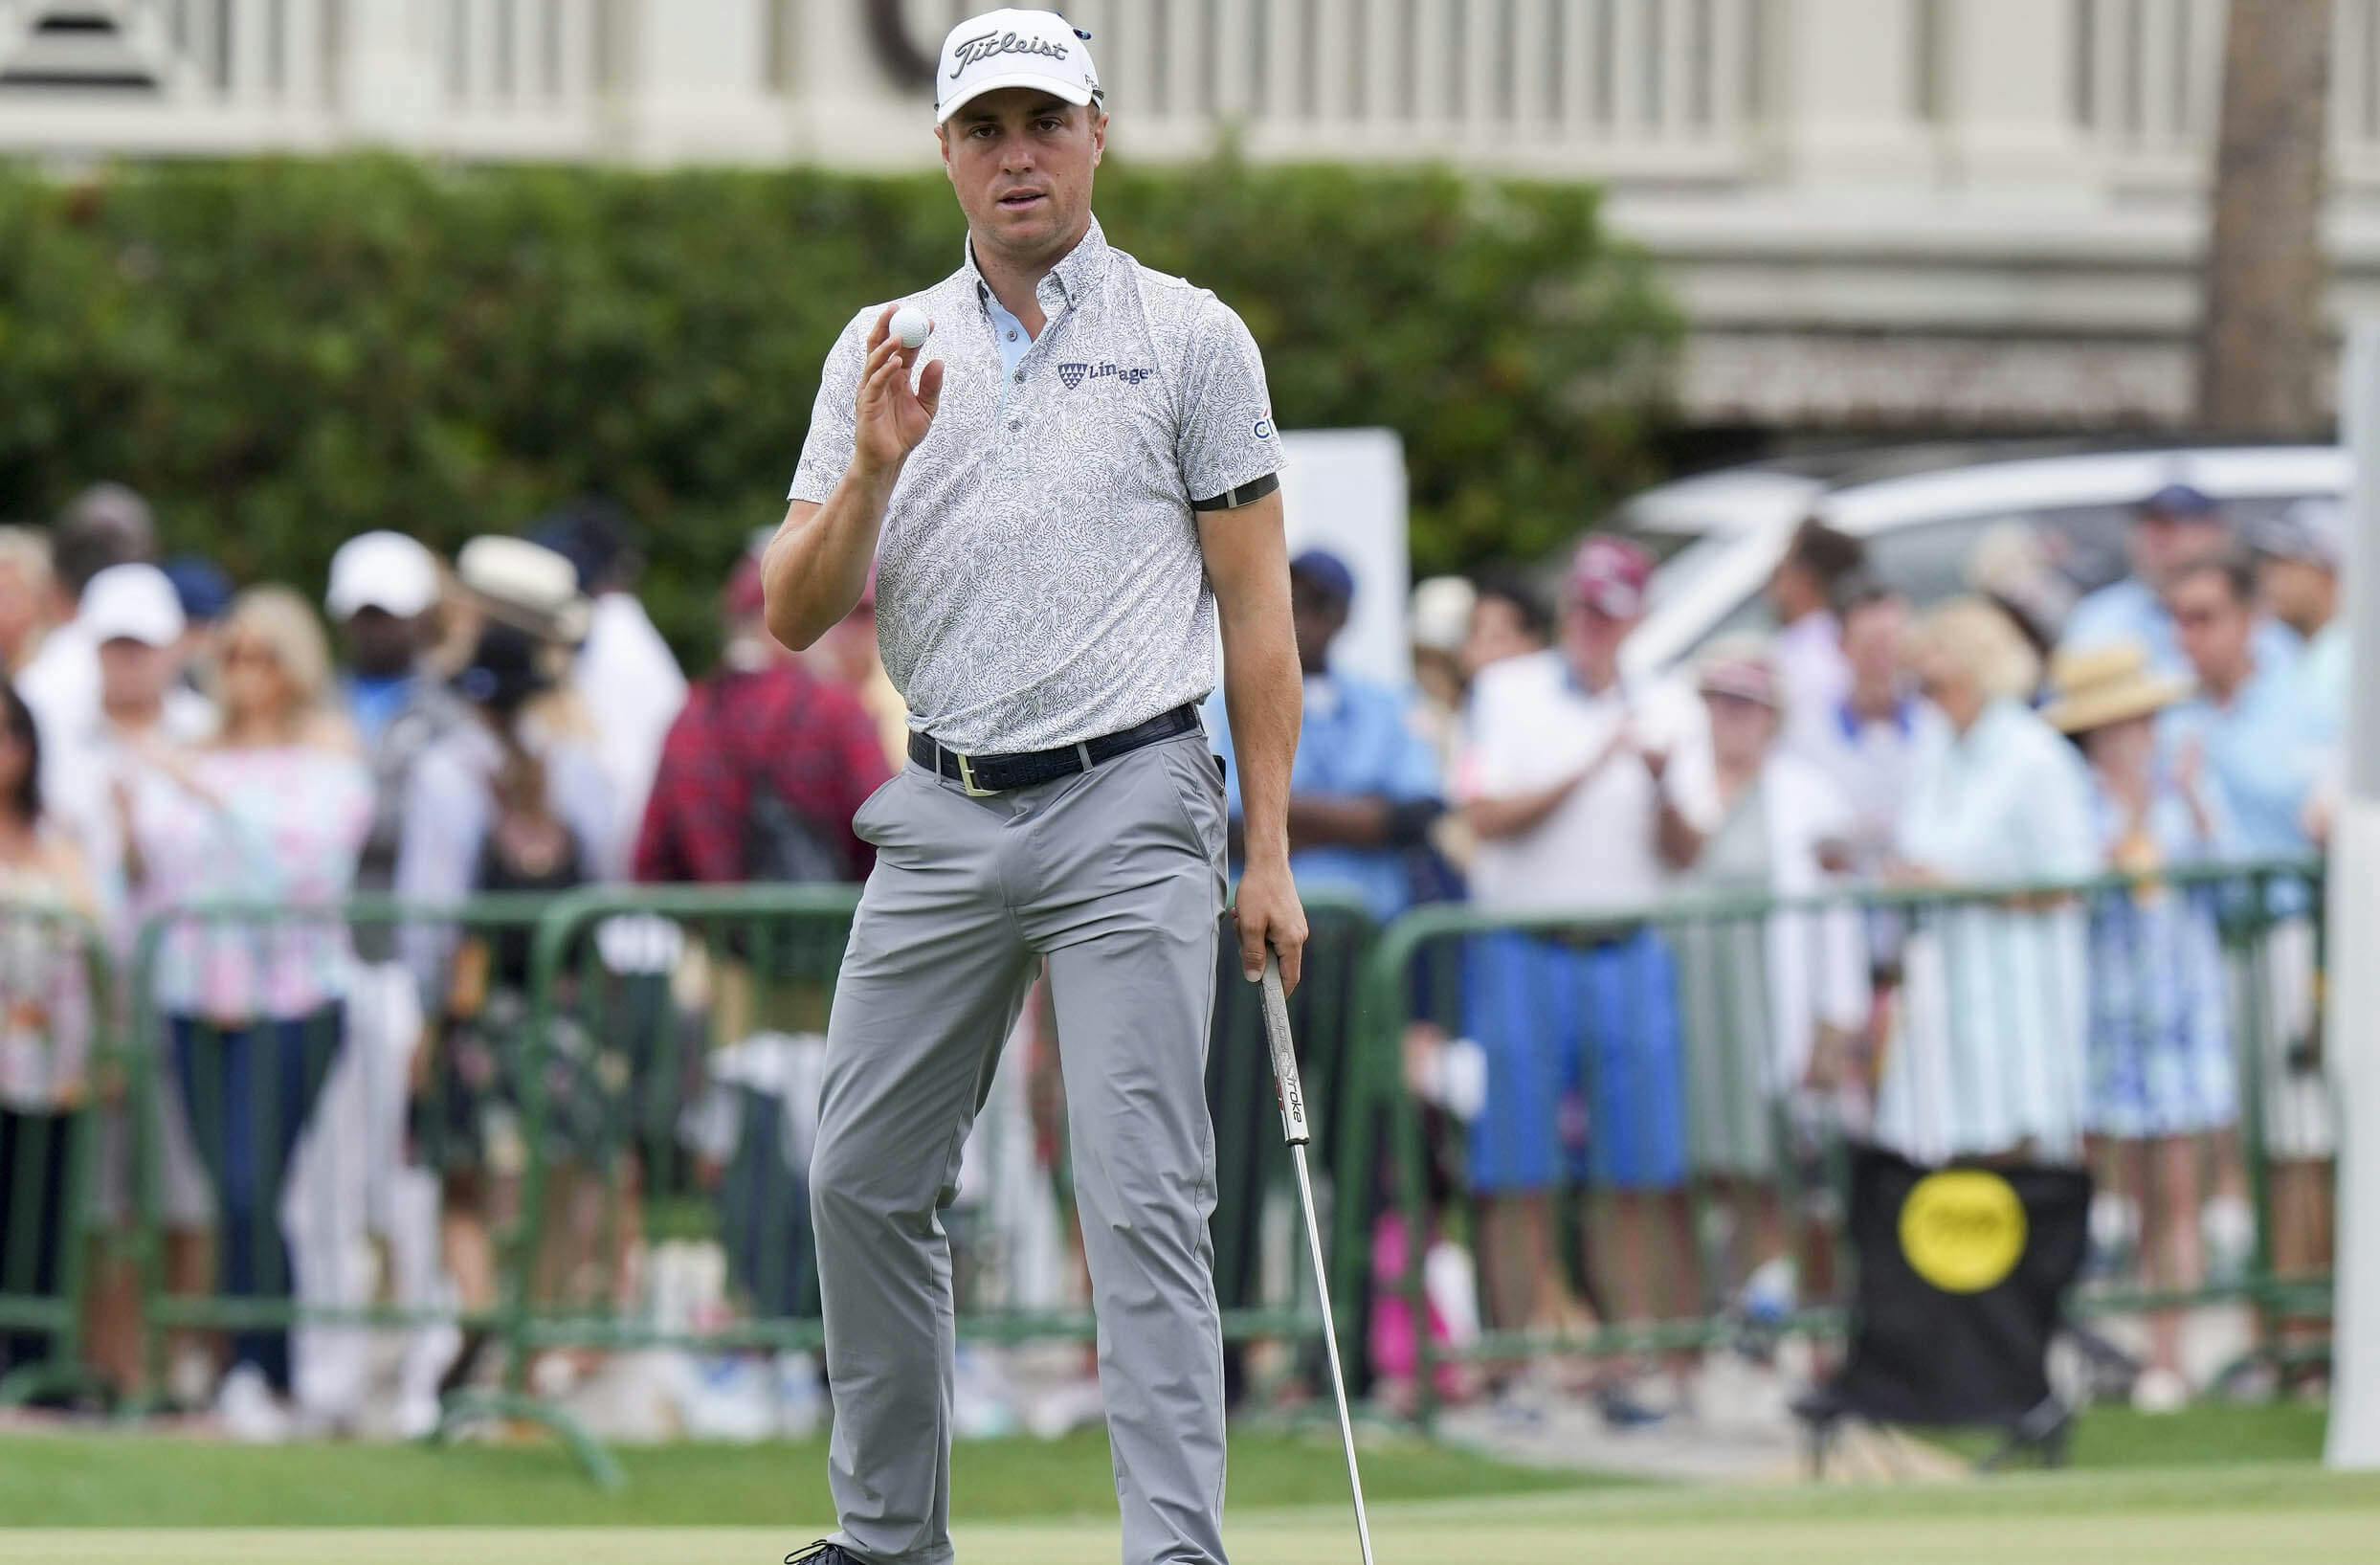 Justin Thomas acknowledges the crowd after a birdie putt during the third round of the RBC Heritage golf tournament.